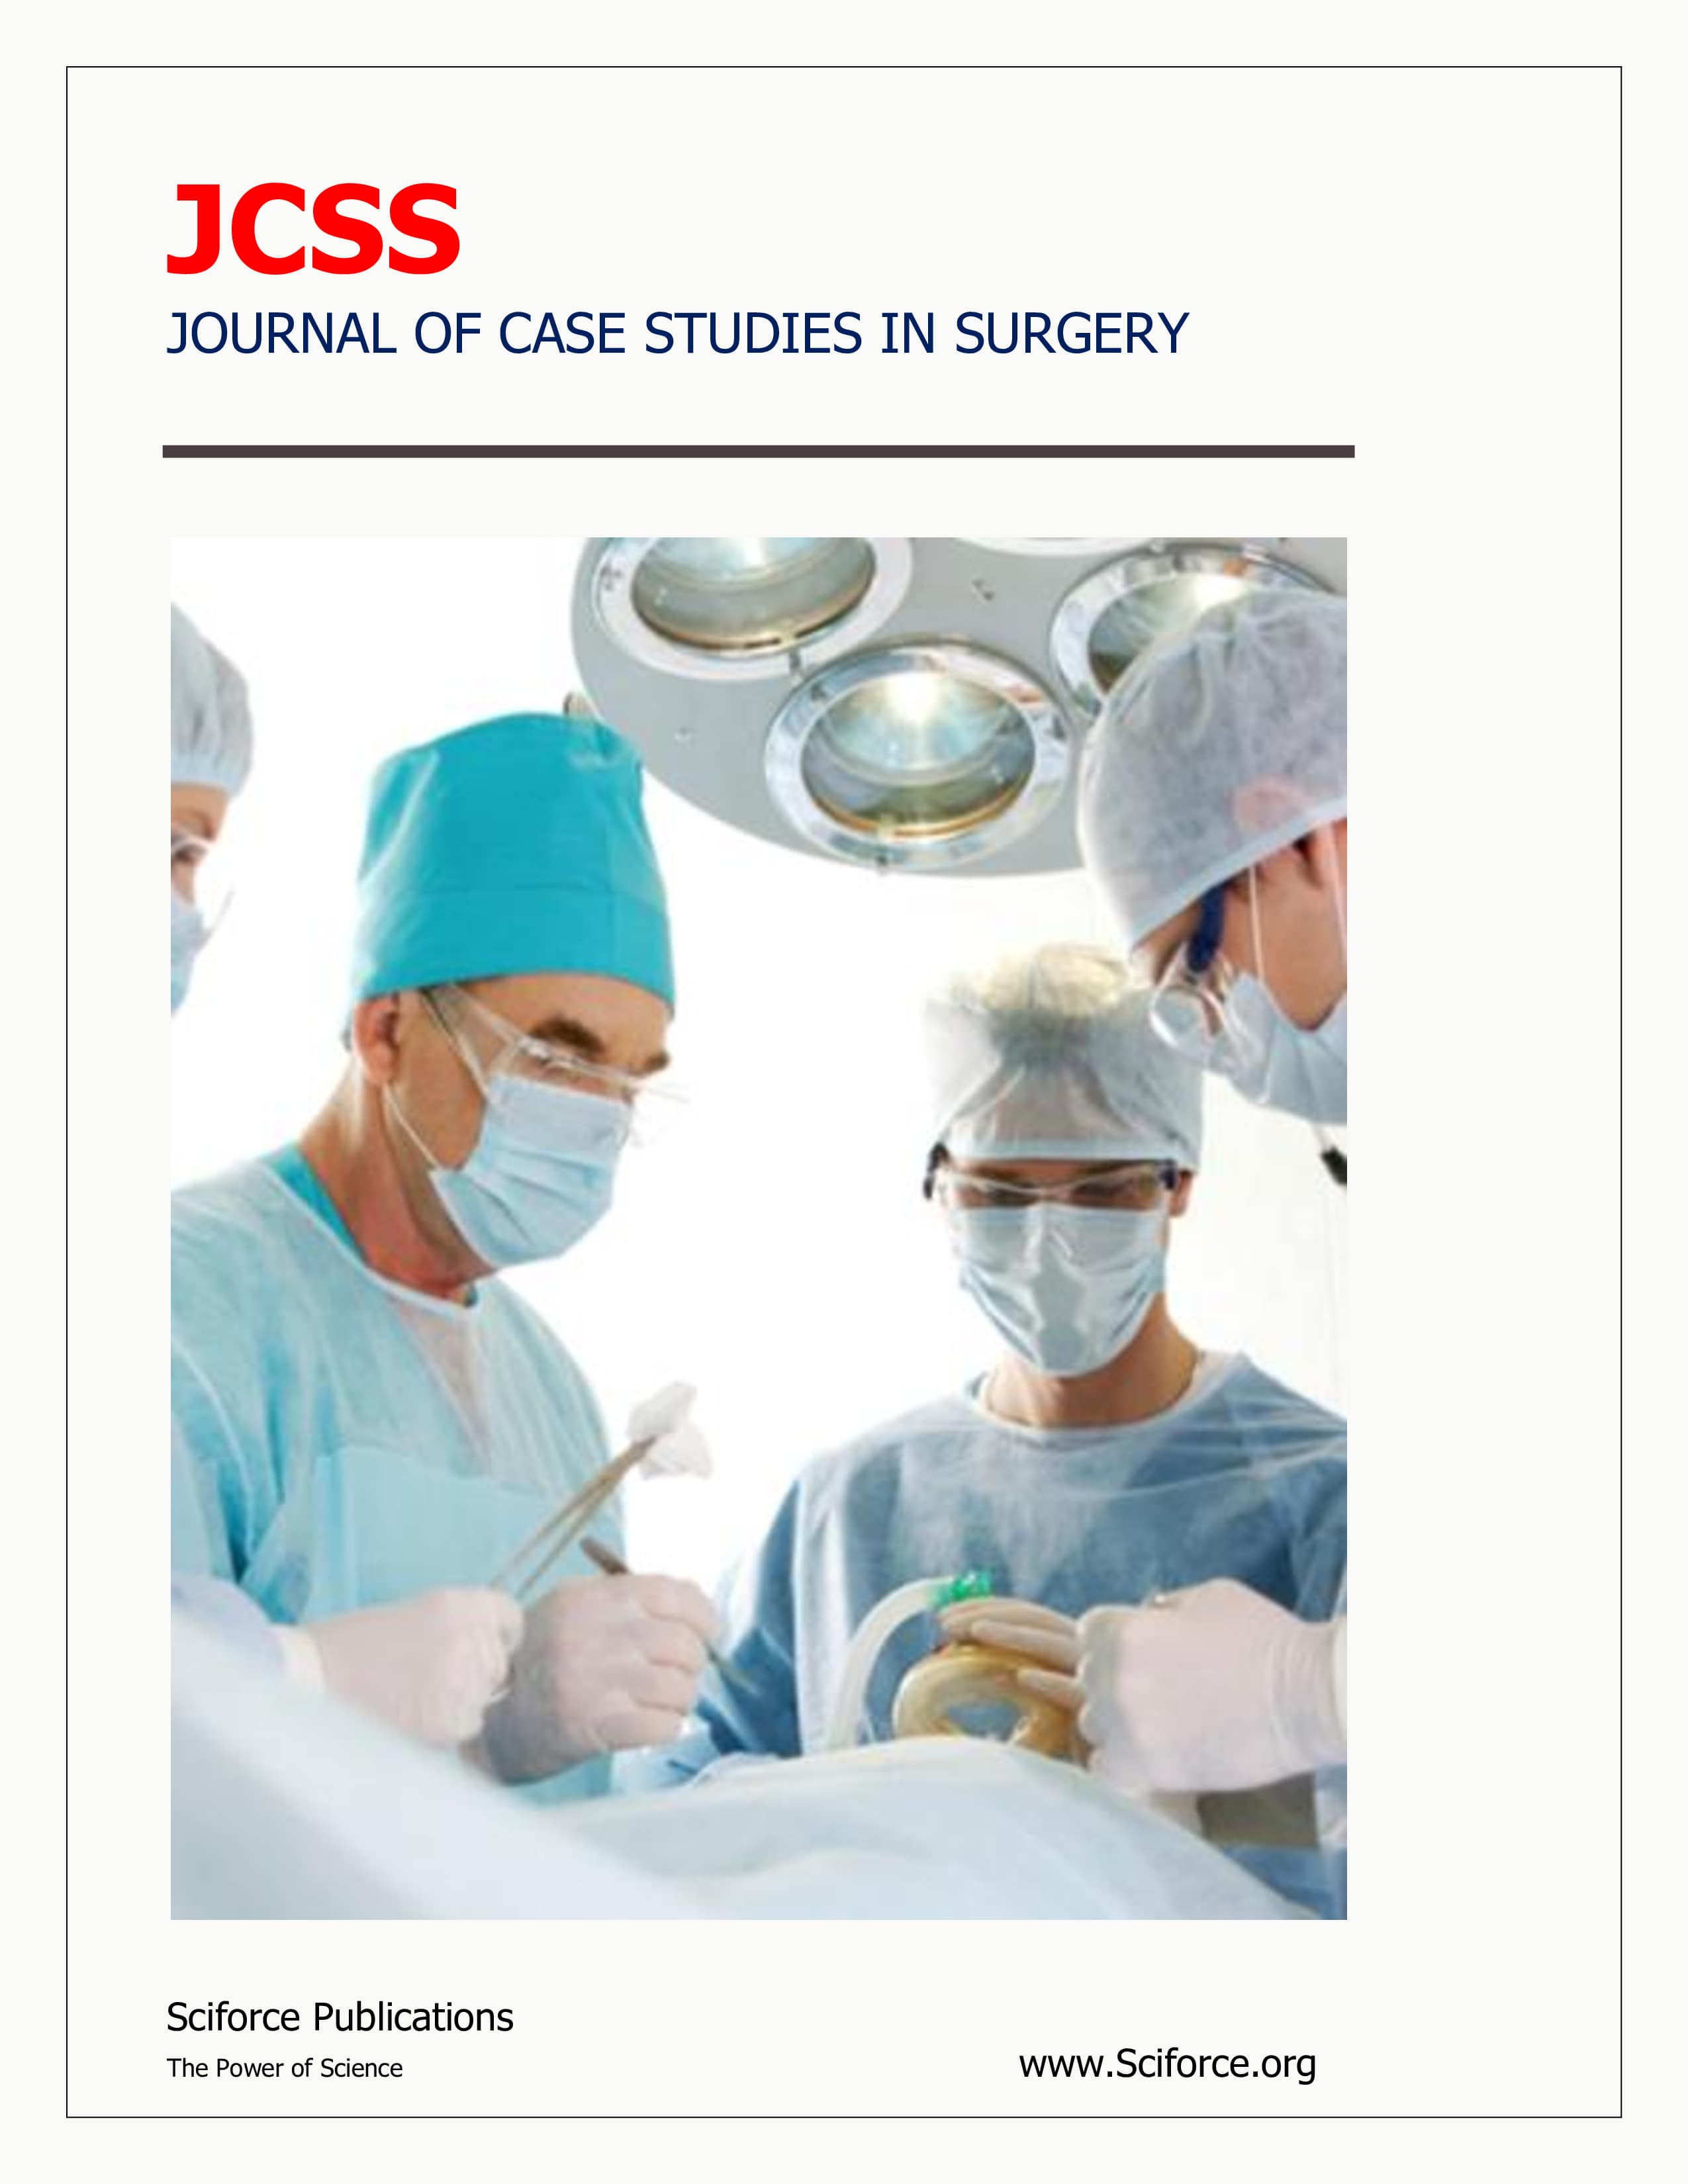 Journal of Clinical Case Studies In Surgery